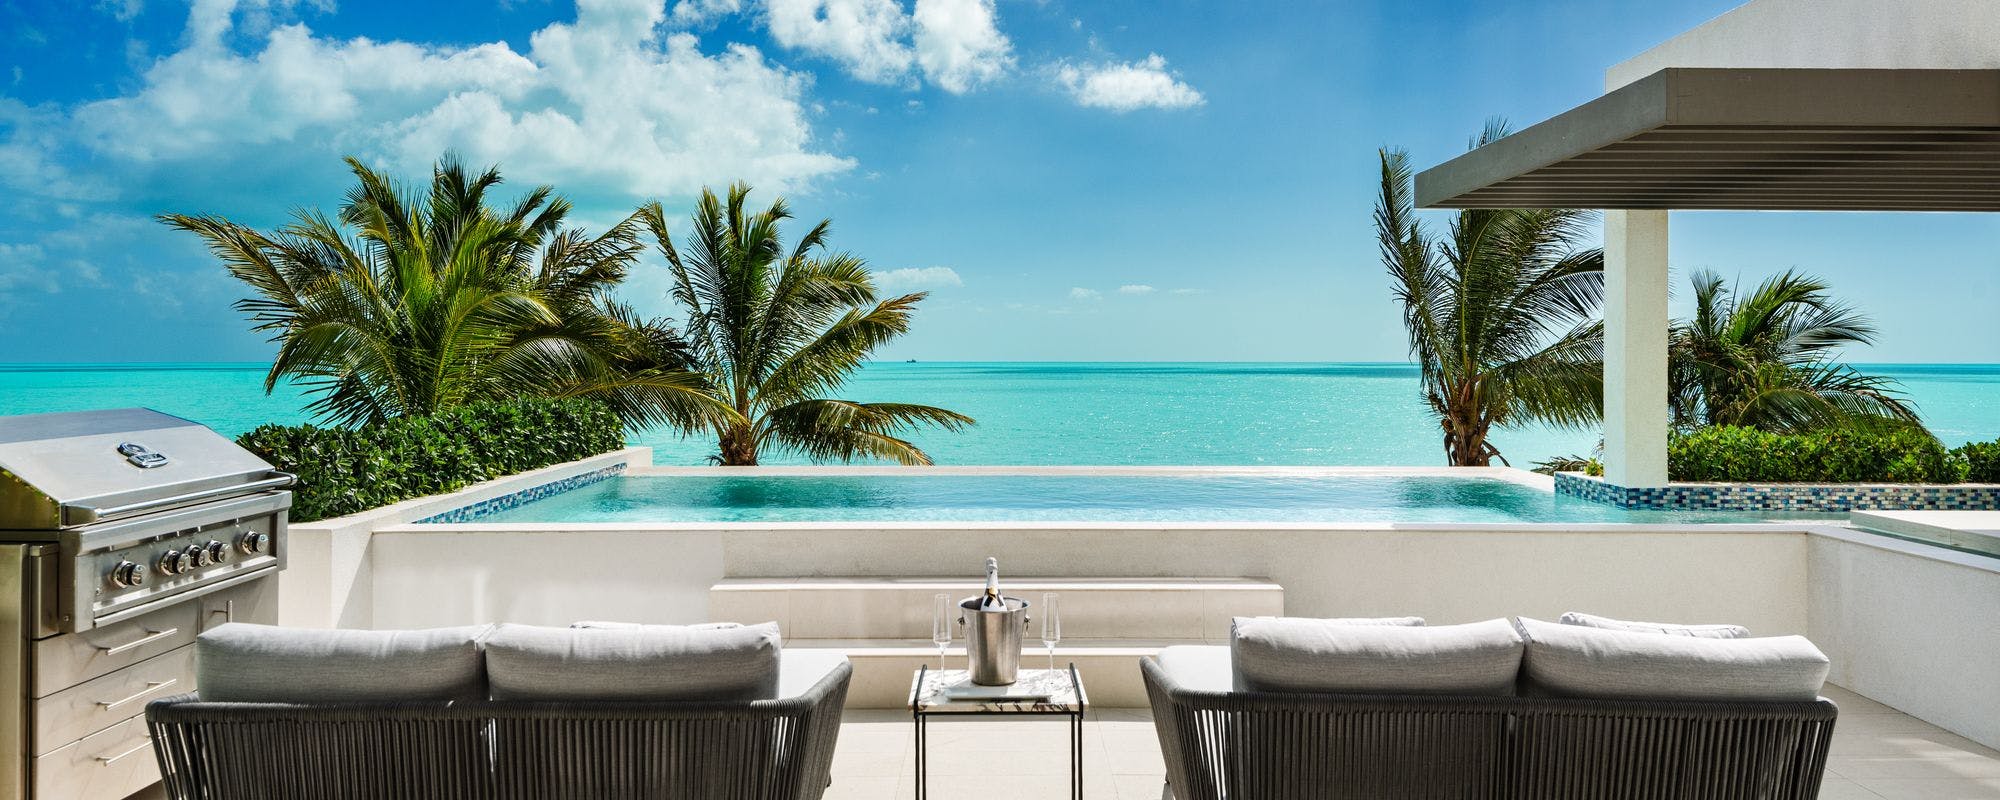 Outdoor living space with a private pool at a Turks and Caicos vacation rental.